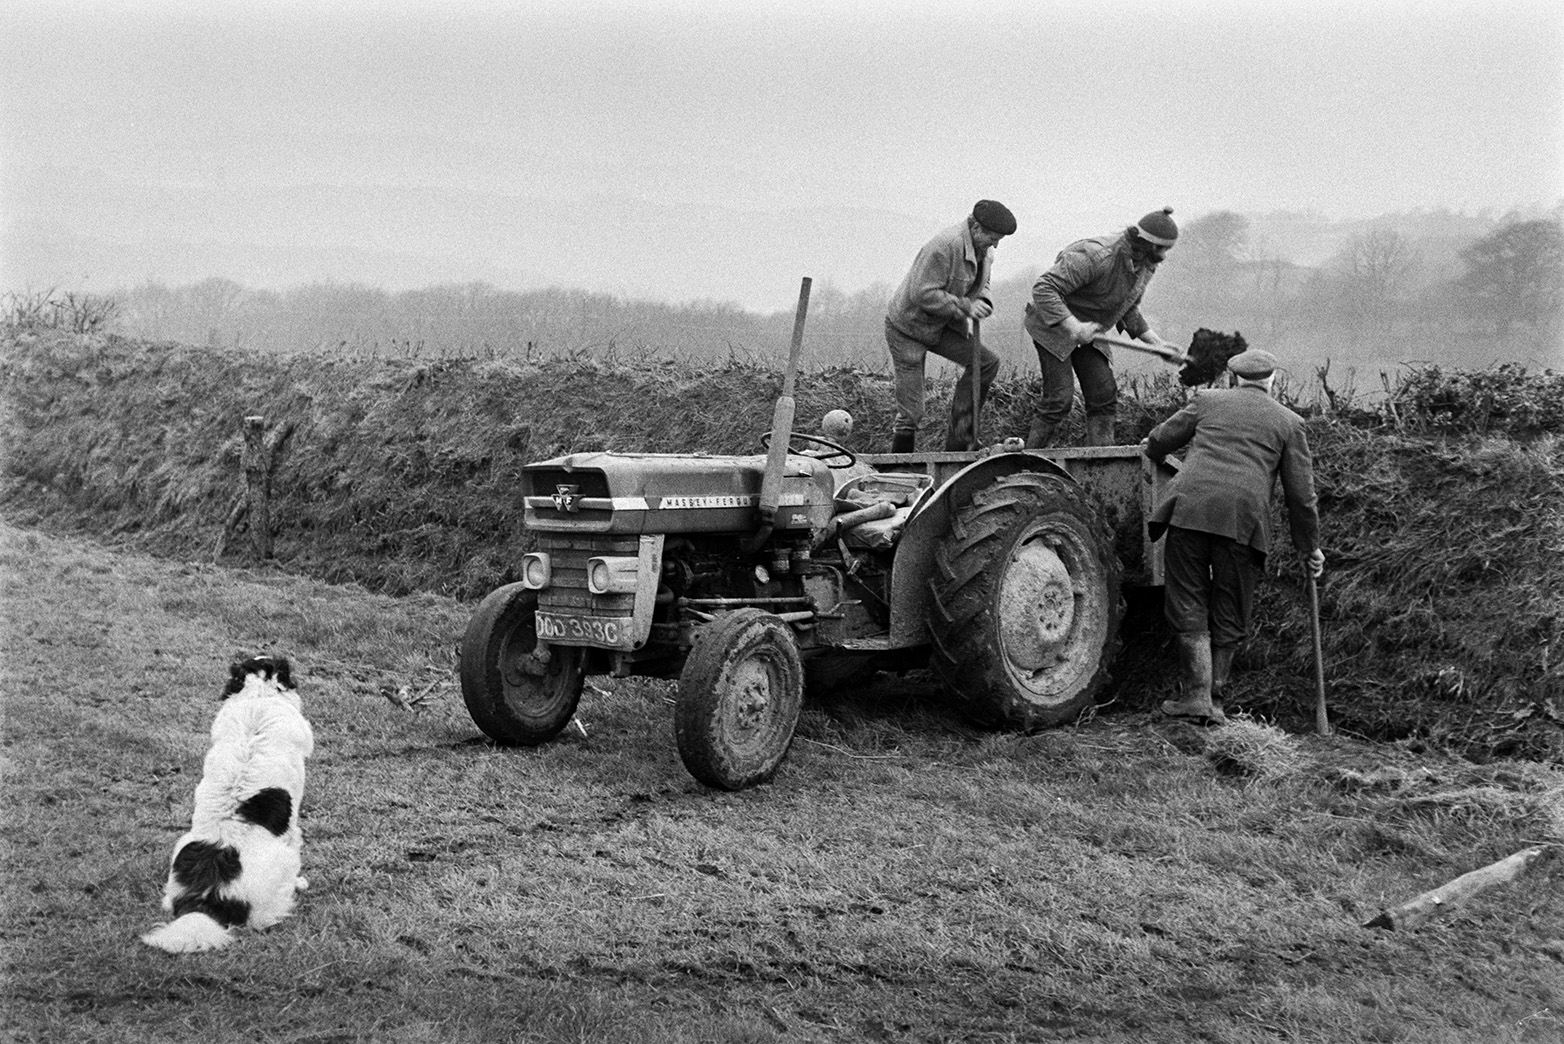 Derek Bright, in the centre, Ivor Bourne, on the left, and possibly Tom Hooper on the right, clatting or building up a hedgebank, using turf from a link box attached to a tractor, in a field at Mill Road Farm, Beaford. A dog is watching them. The farm was also known as Jeffrys.